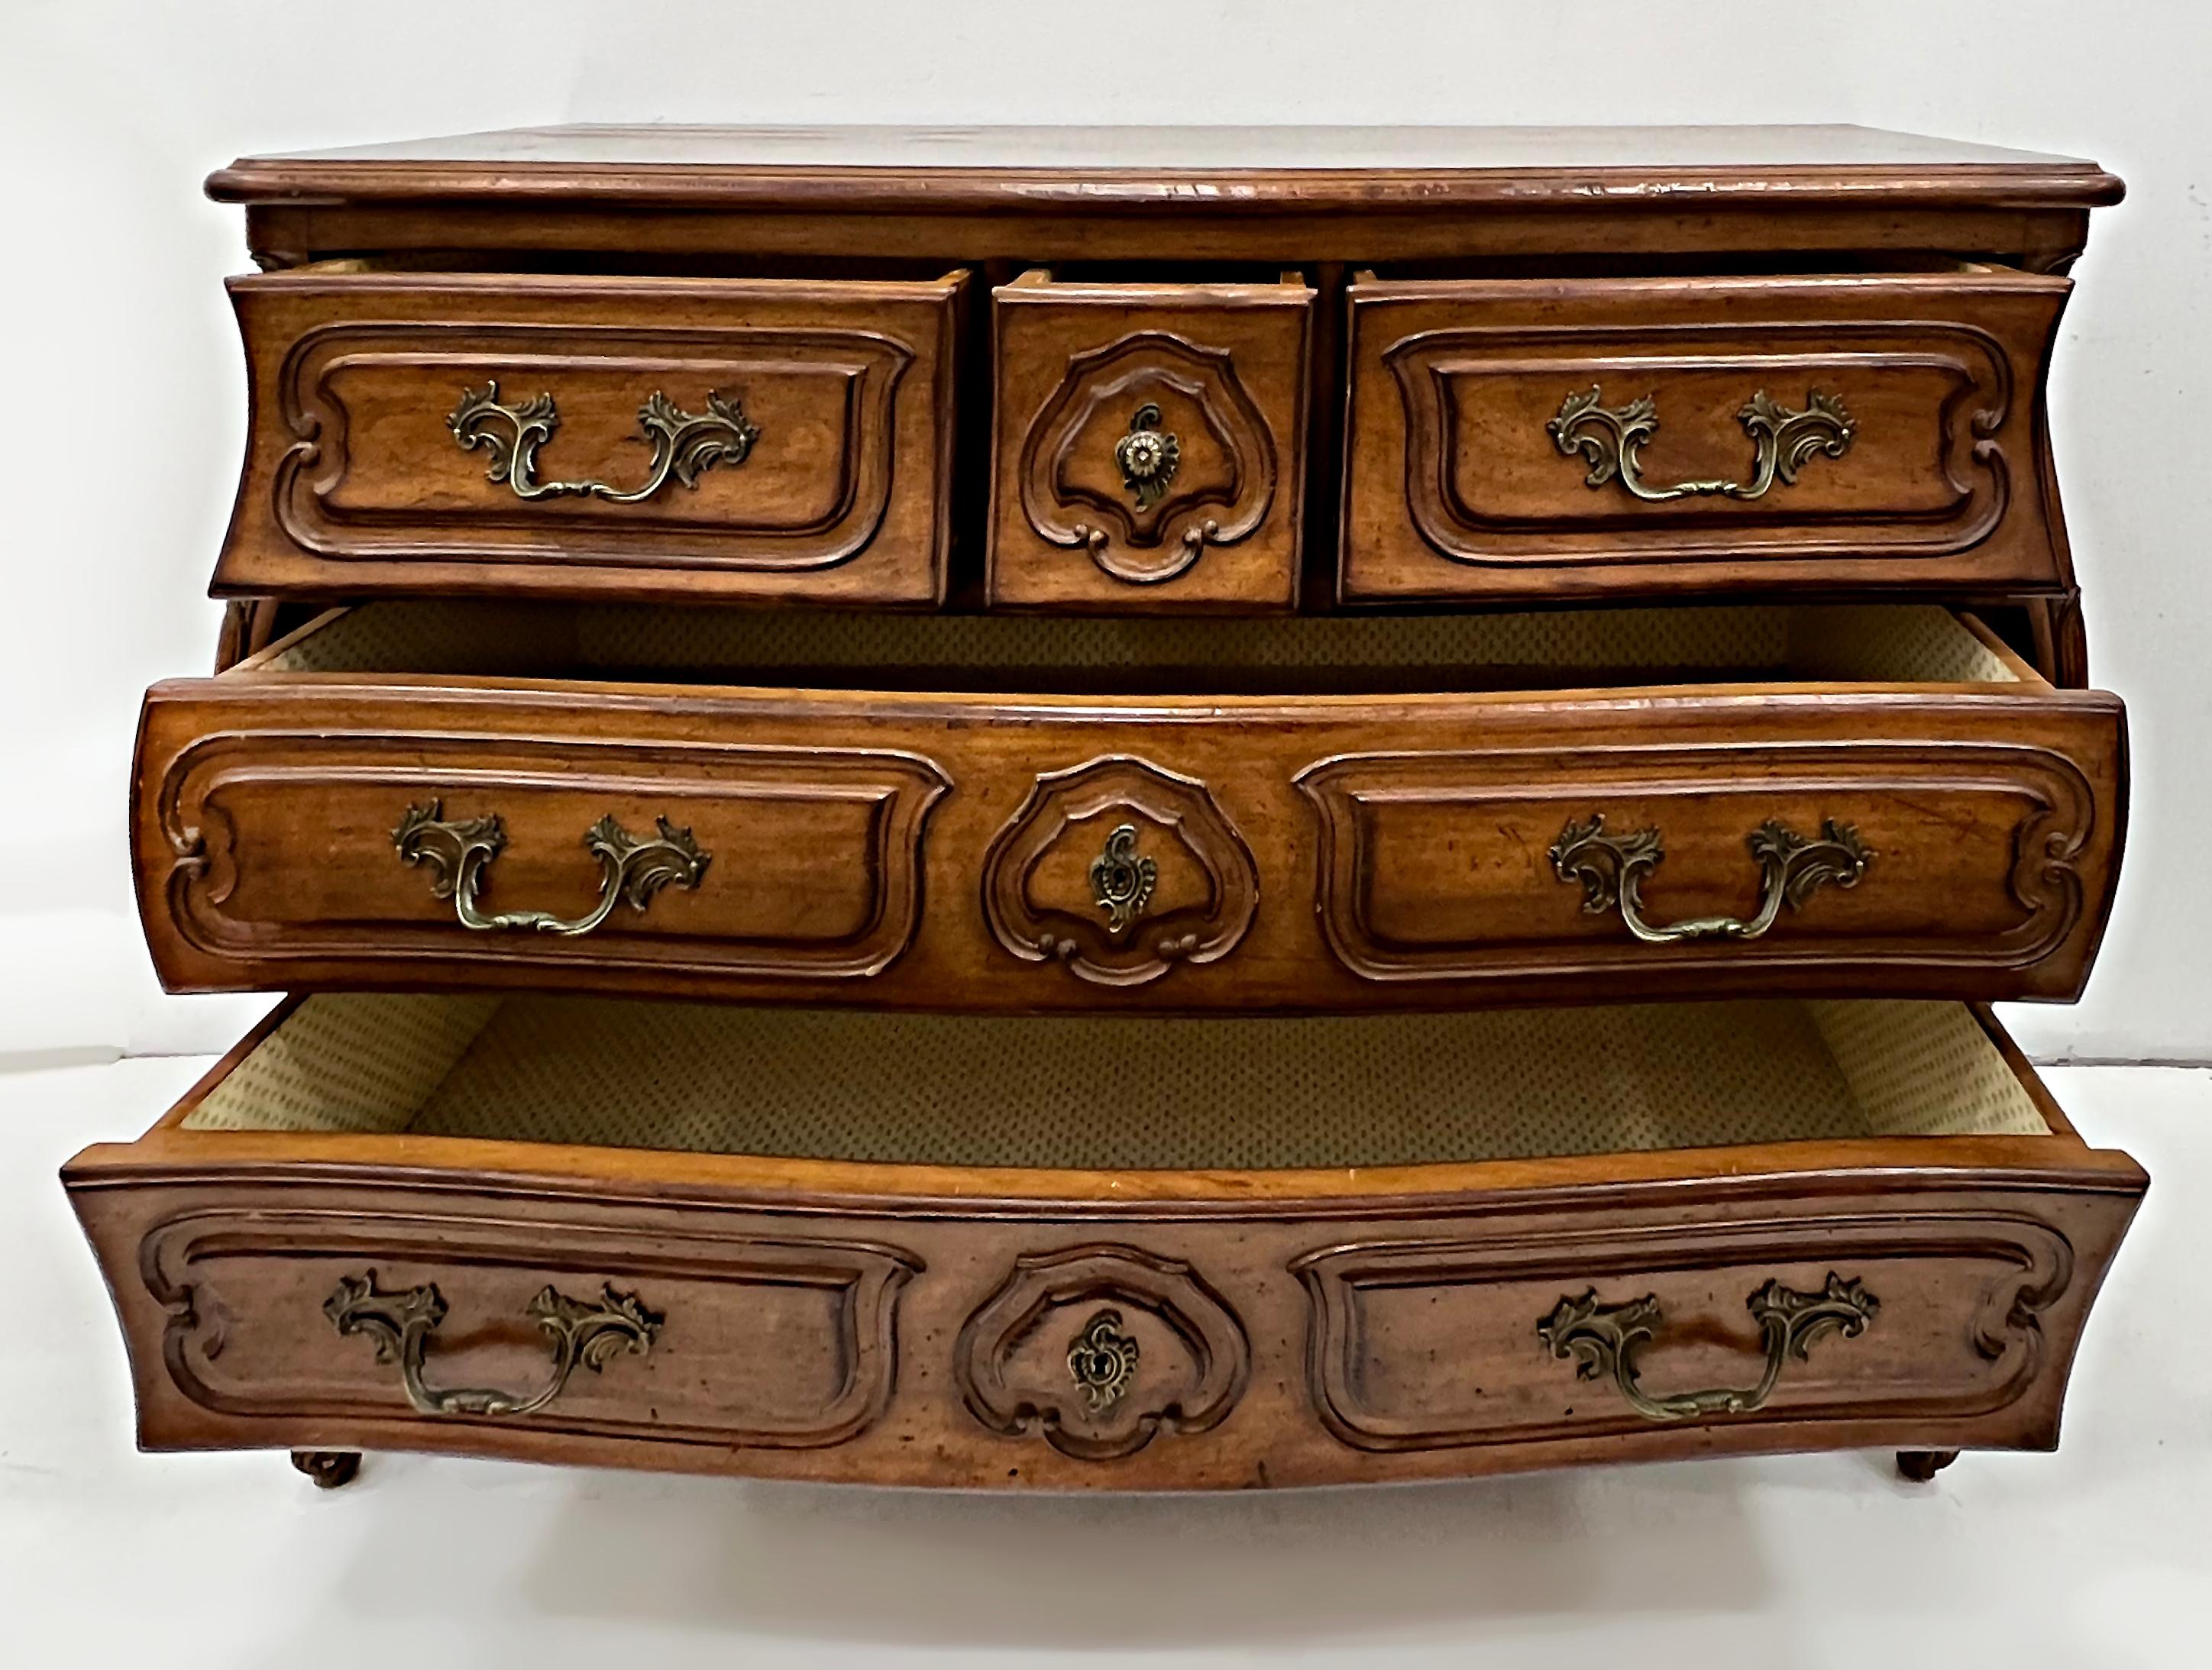 French Provincial Style Auffray & Co. Bombay Chest of Drawers 3